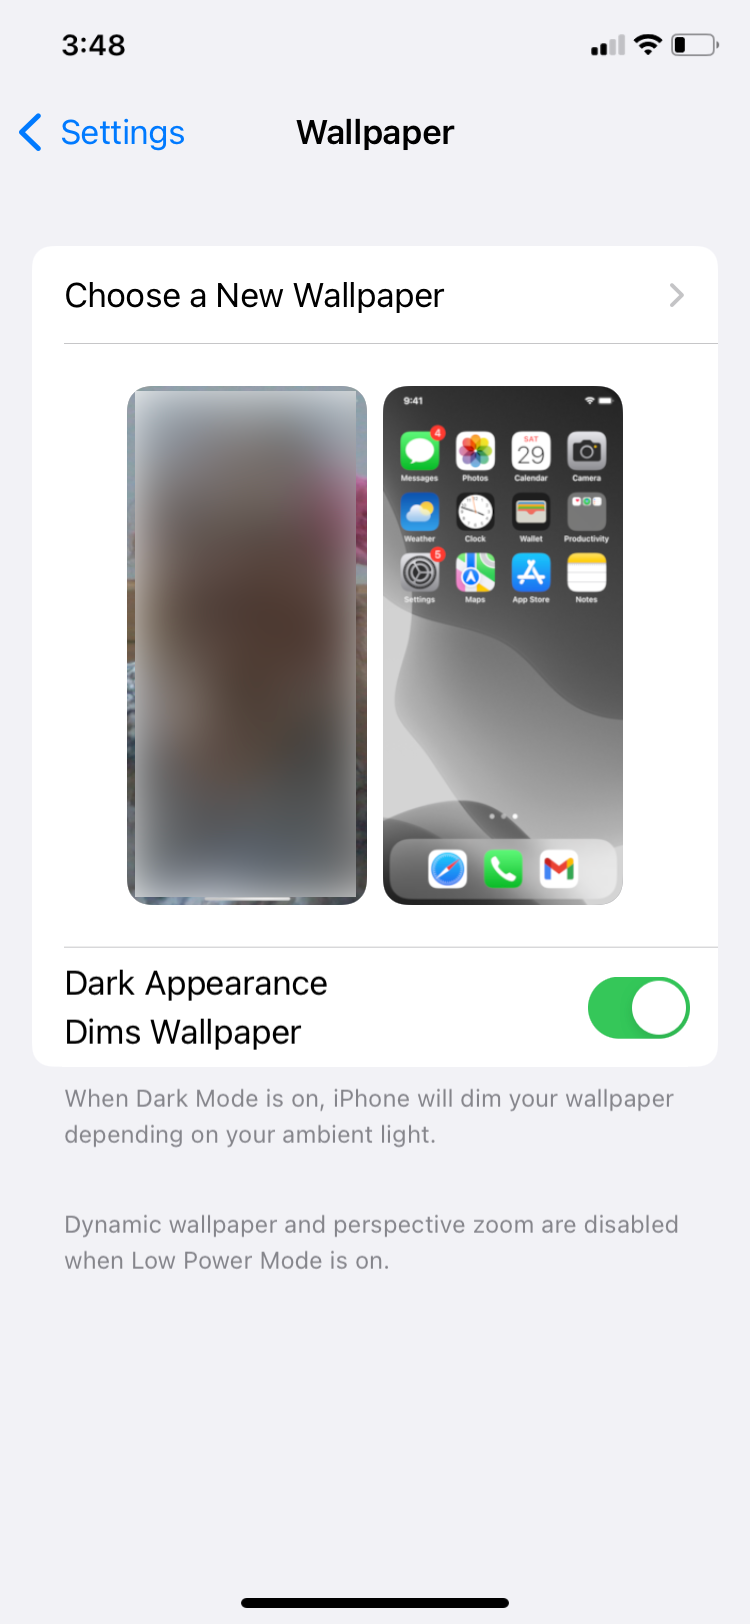 Choose new wallpaper option in iPhone